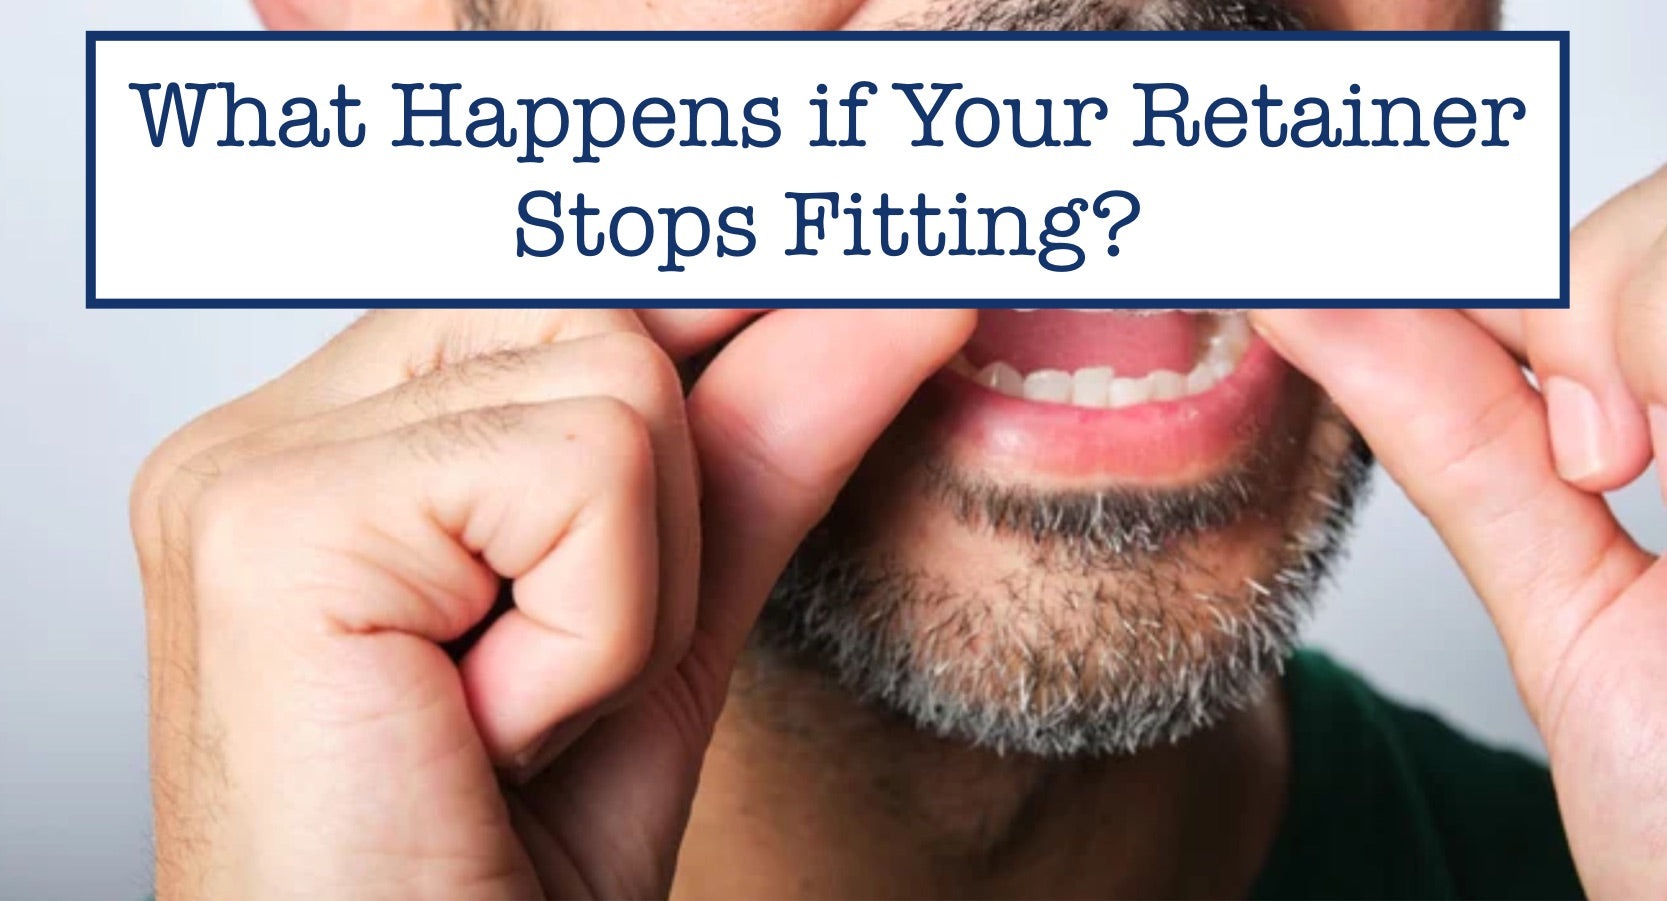 What Happens if Your Retainer Stops Fitting?